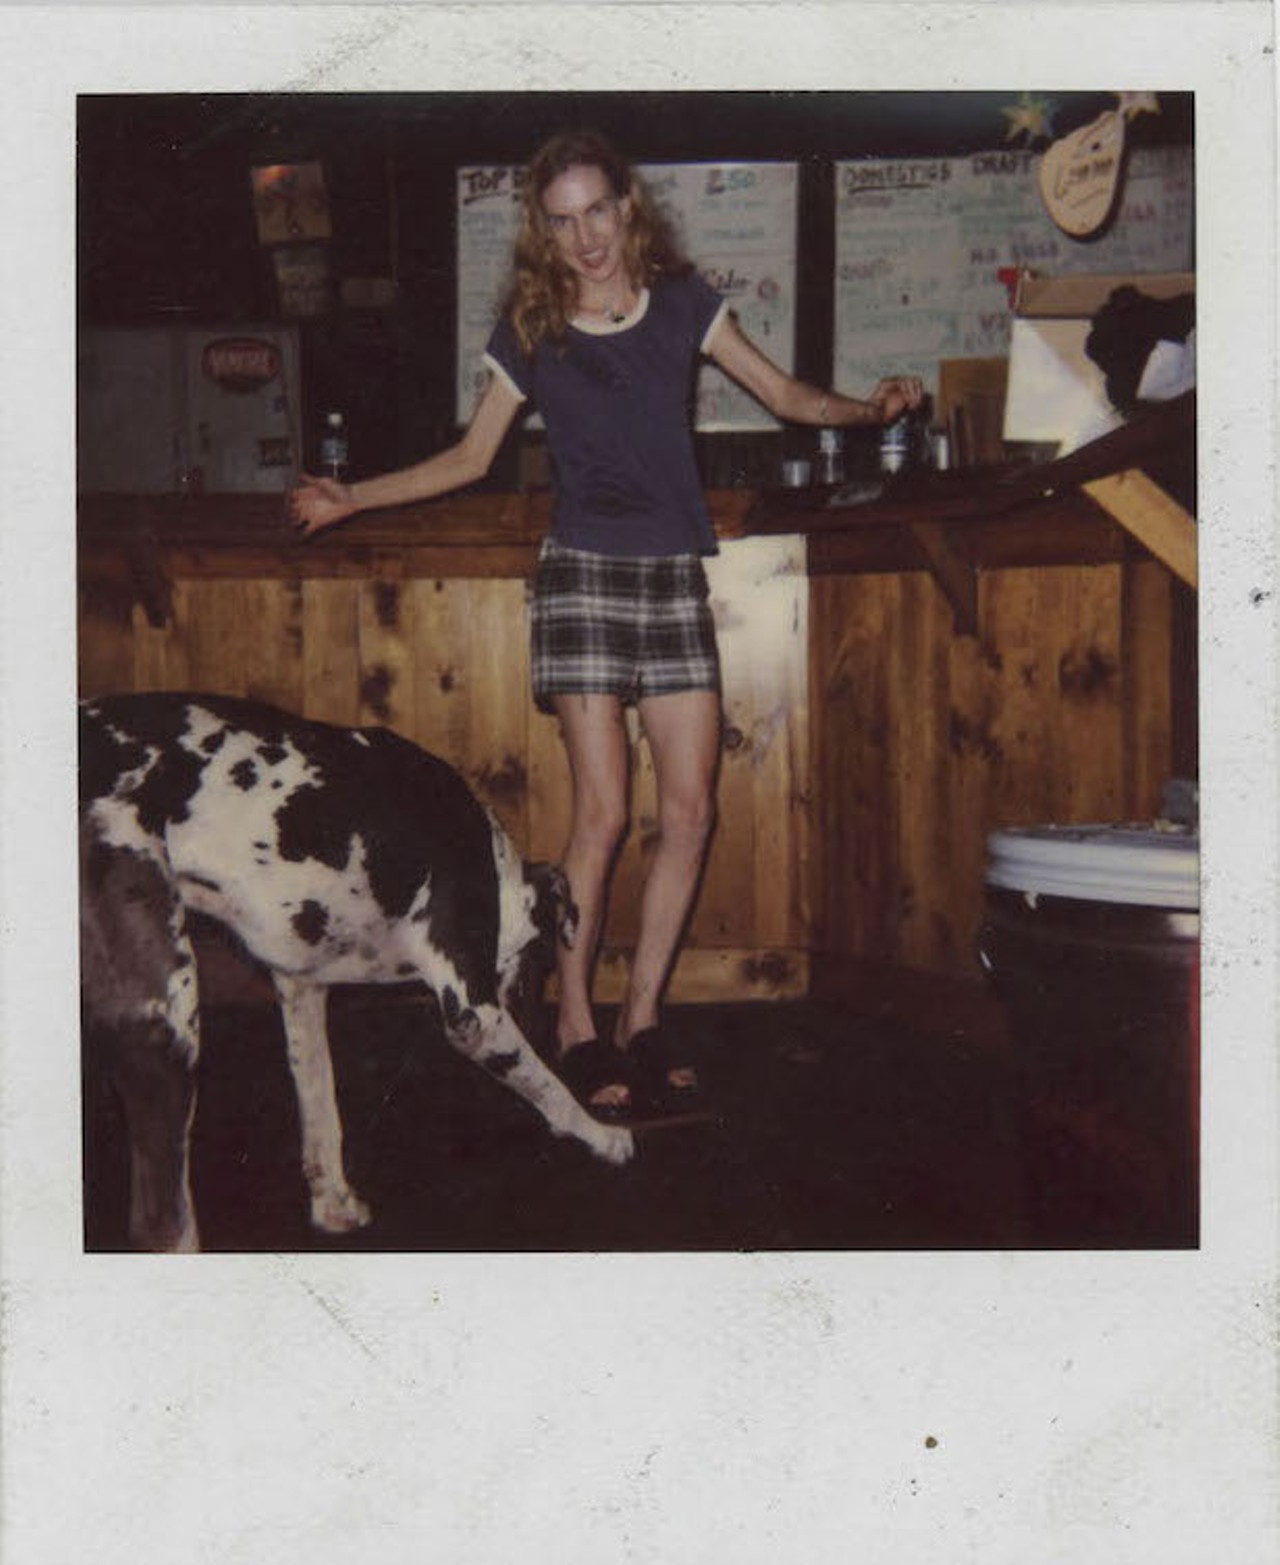 Vintage polaroids from Bill Bryson's book on legendary Gainesville rock club Covered Dish